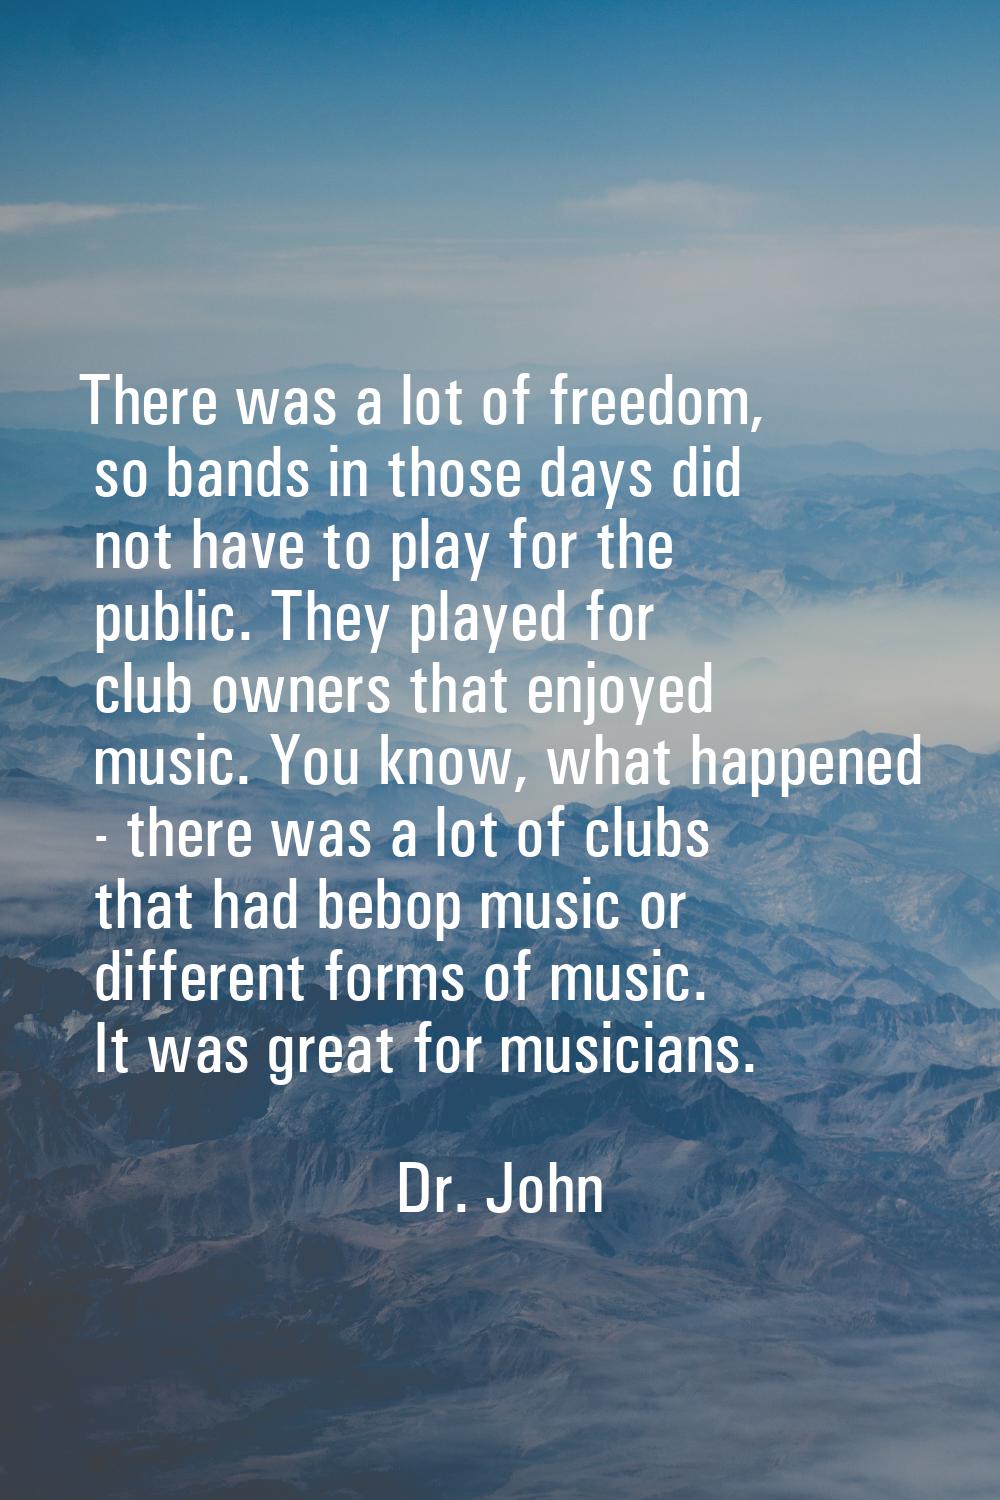 There was a lot of freedom, so bands in those days did not have to play for the public. They played